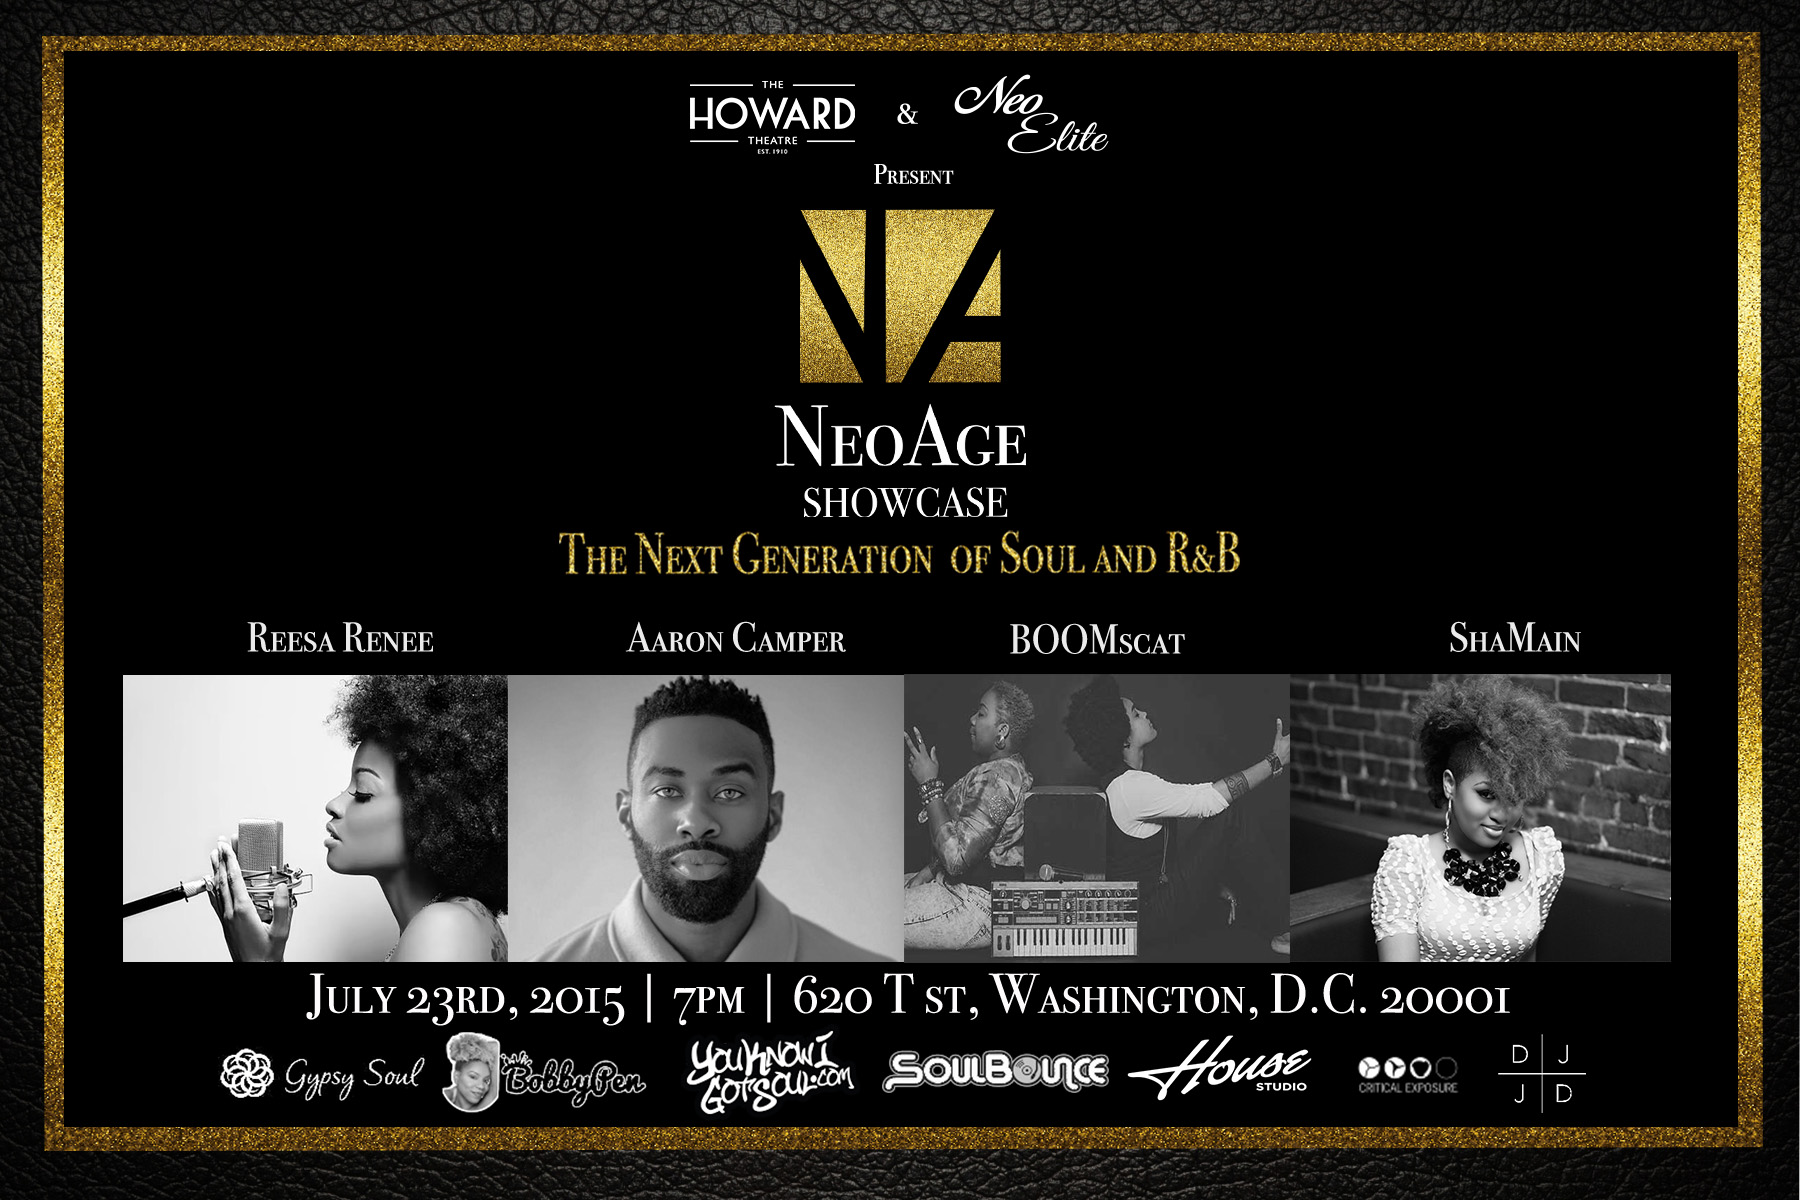 YouKnowIGotSoul to Sponsor Upcoming Neo Age Showcase at the Howard Theater in DC  7/23/15